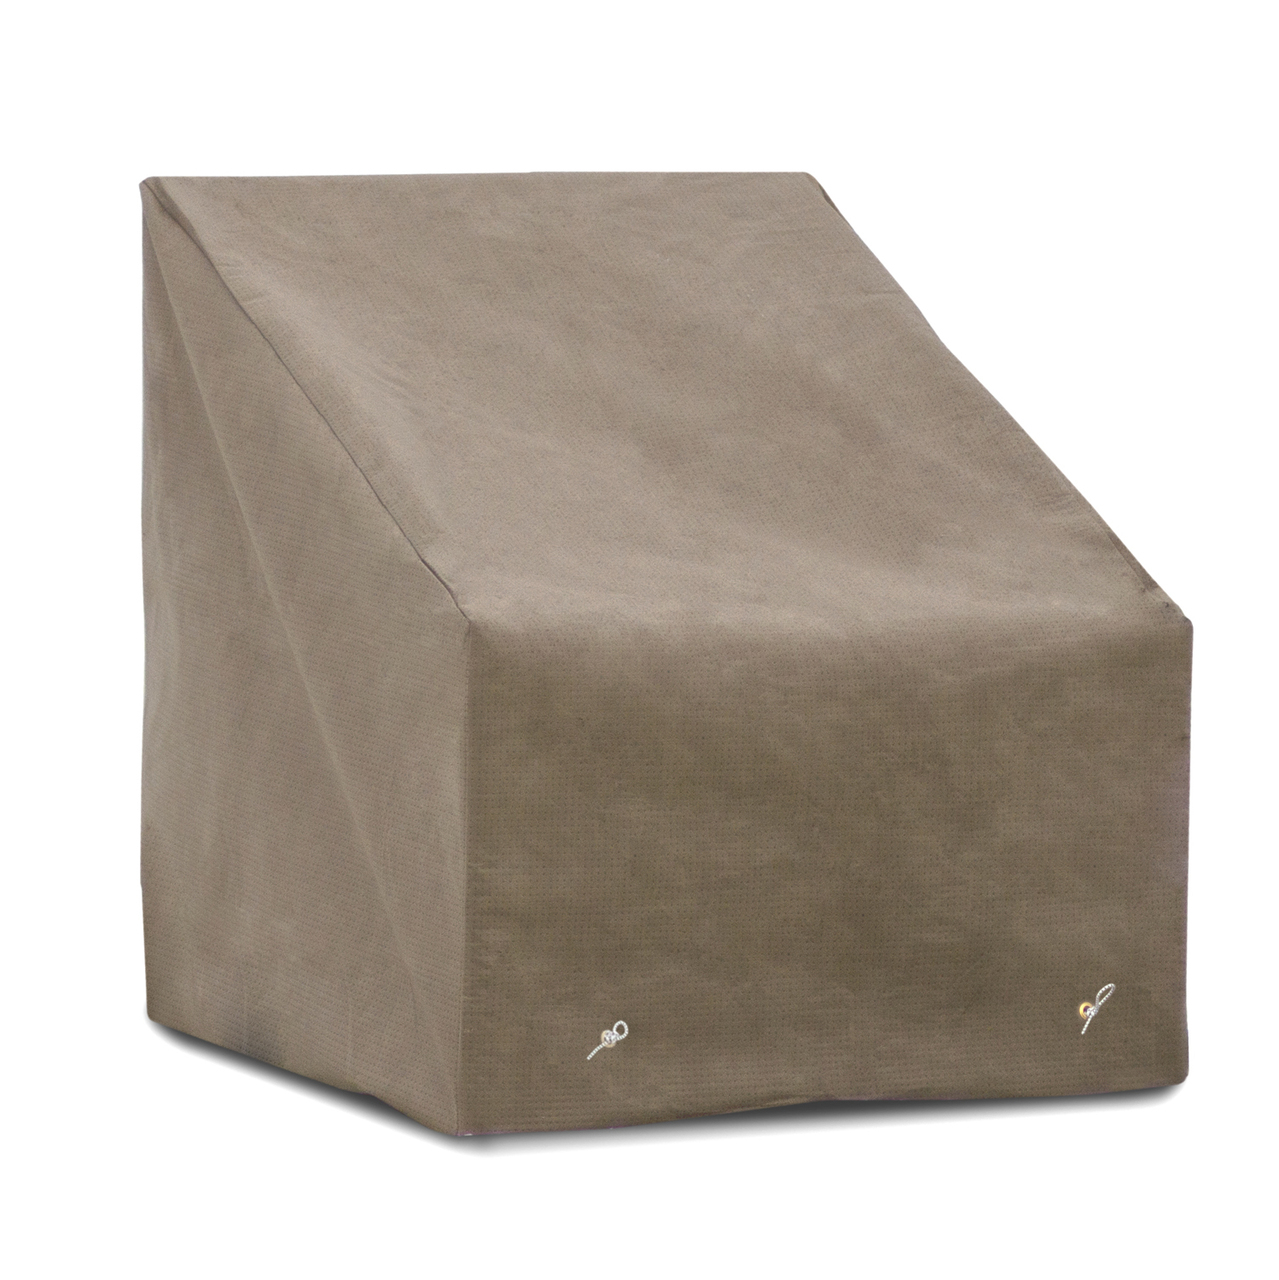 Deep Seating Chair Cover - 34W x 40D x 33H in.